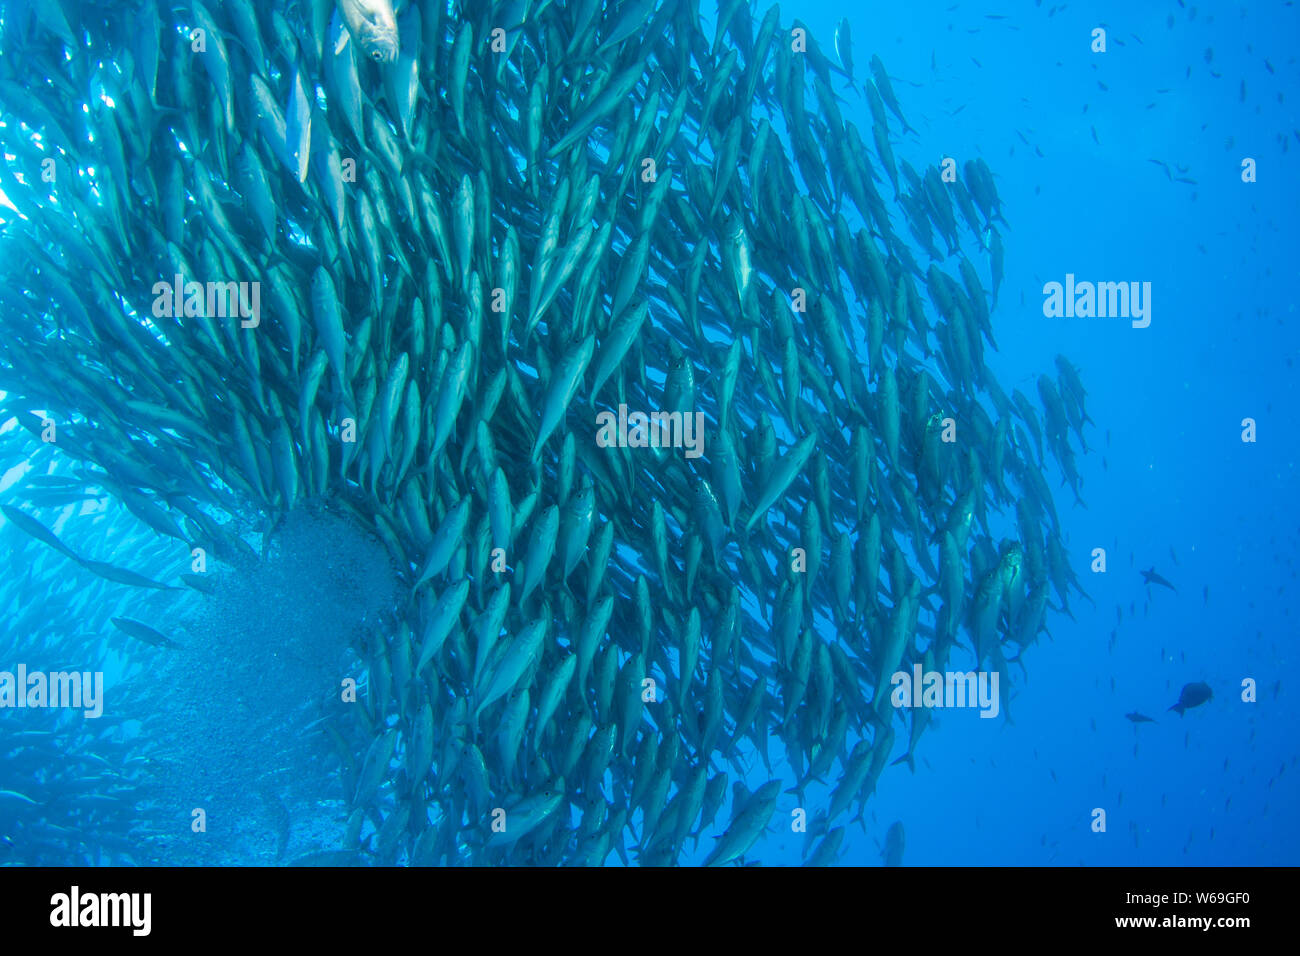 Concept image of overfishing,depletion of fish stocks in the Oceans Stock Photo